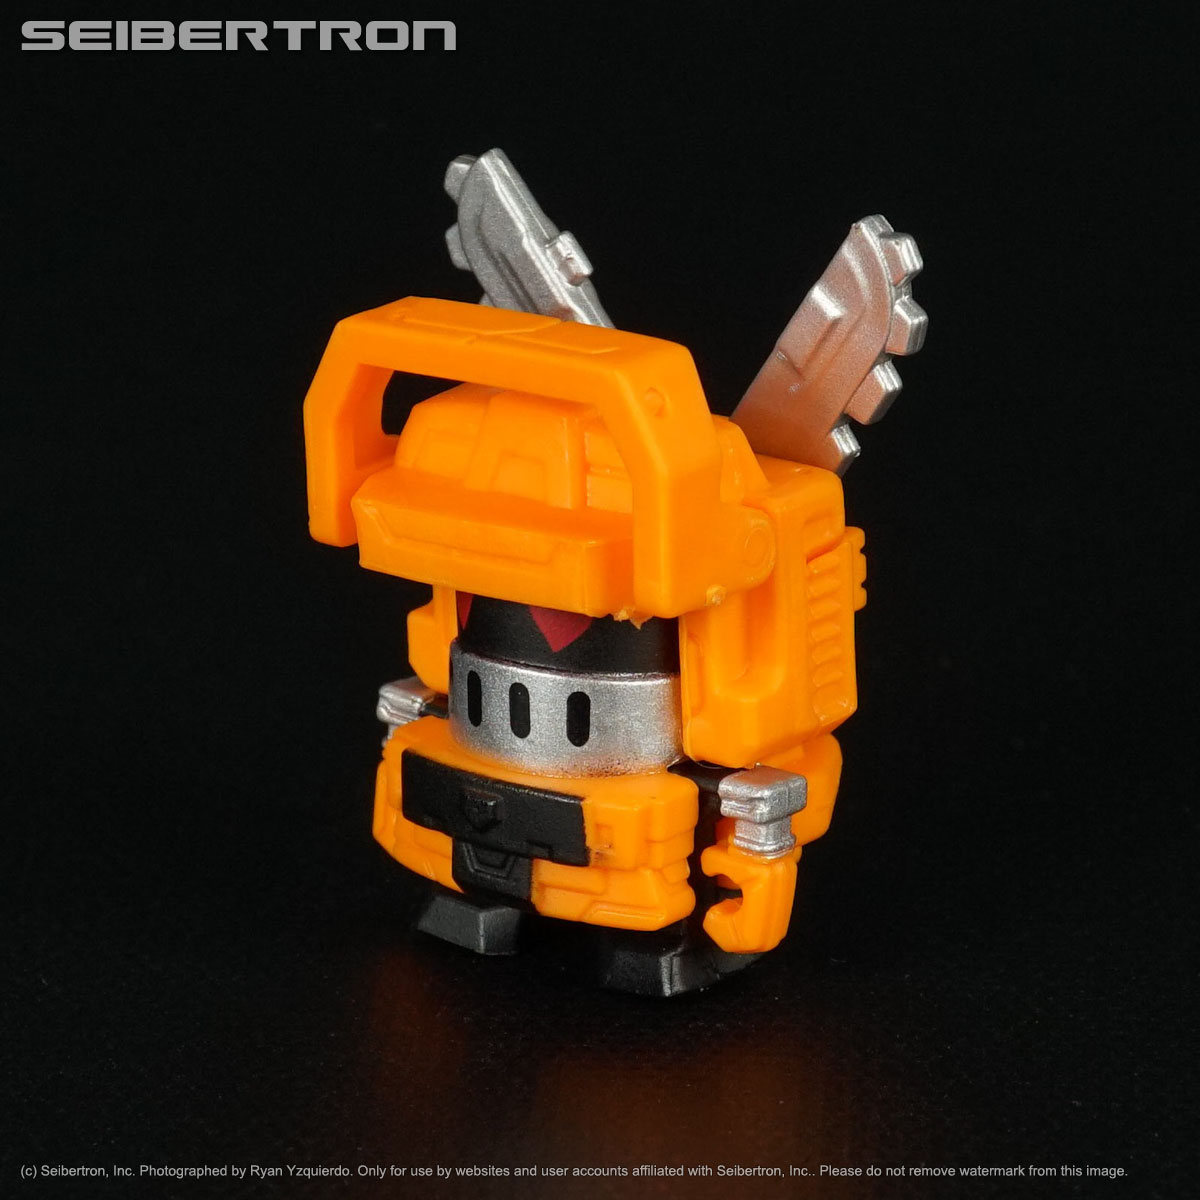 Transformers News: Transformers Legacy Evo, Super7 Unicron, BotBots Series 6, New Comics and more at Seibertron Store